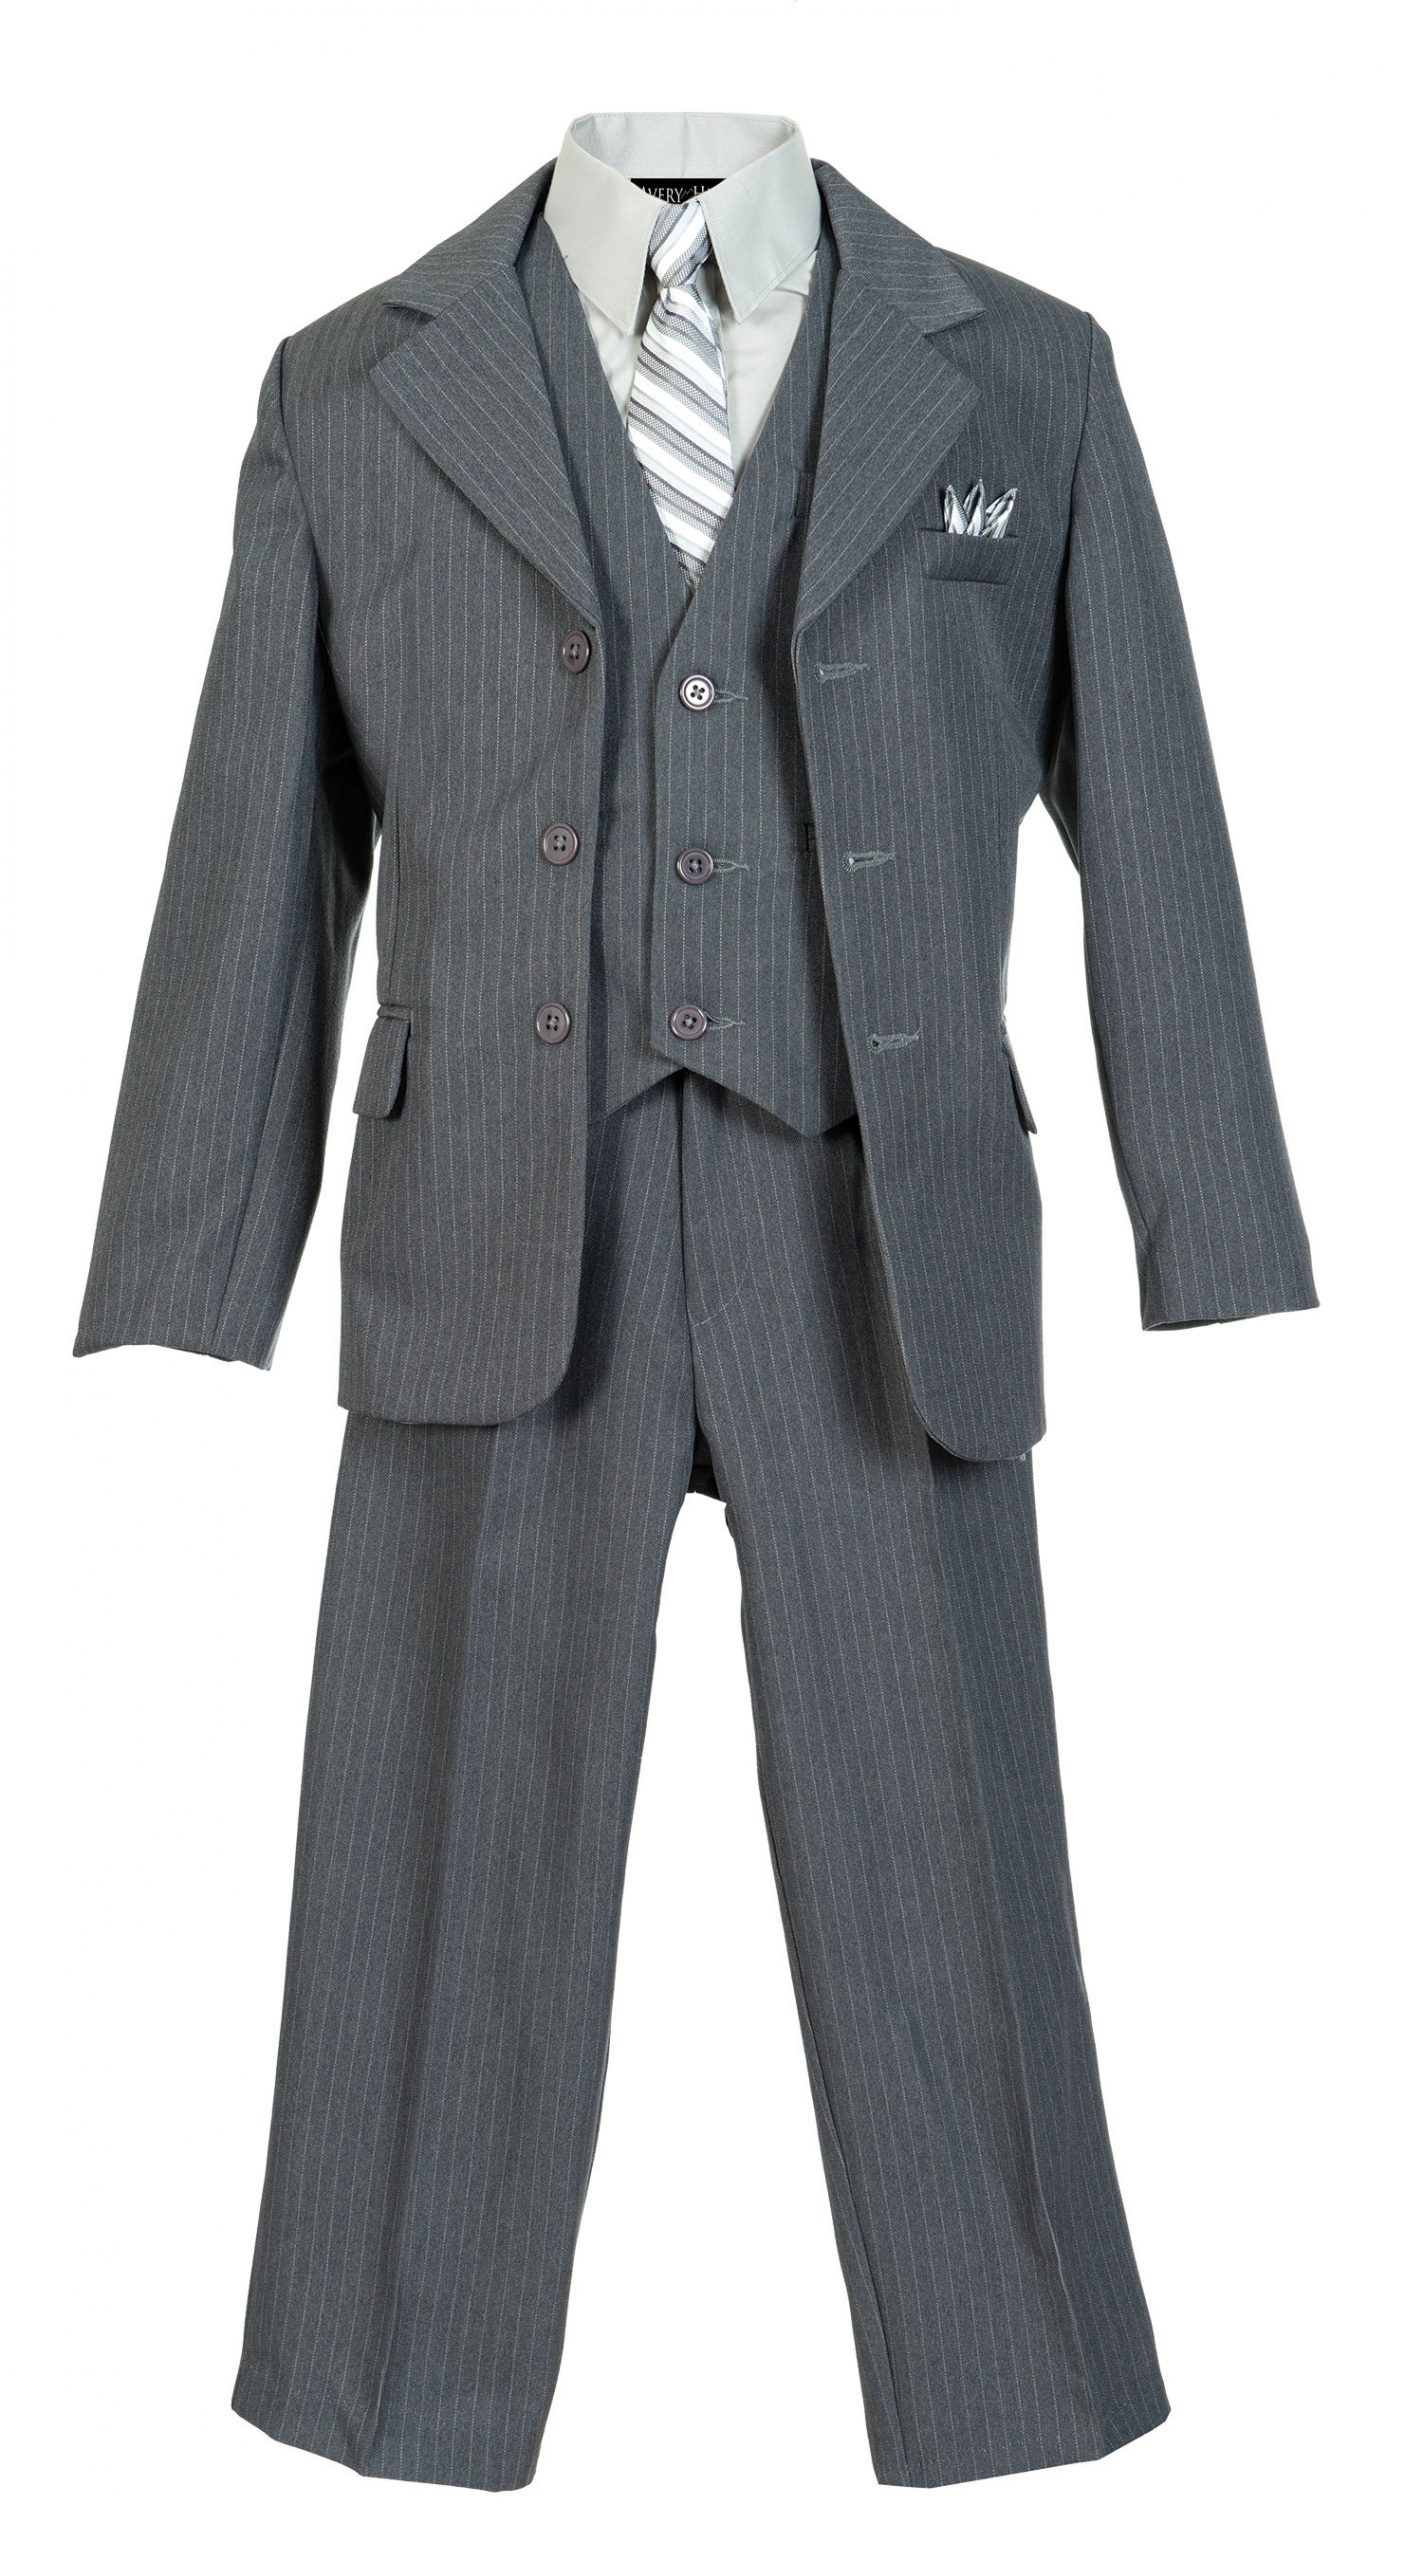 Boys Pinstripe Suit Set with Matching Tie LTGY 2T